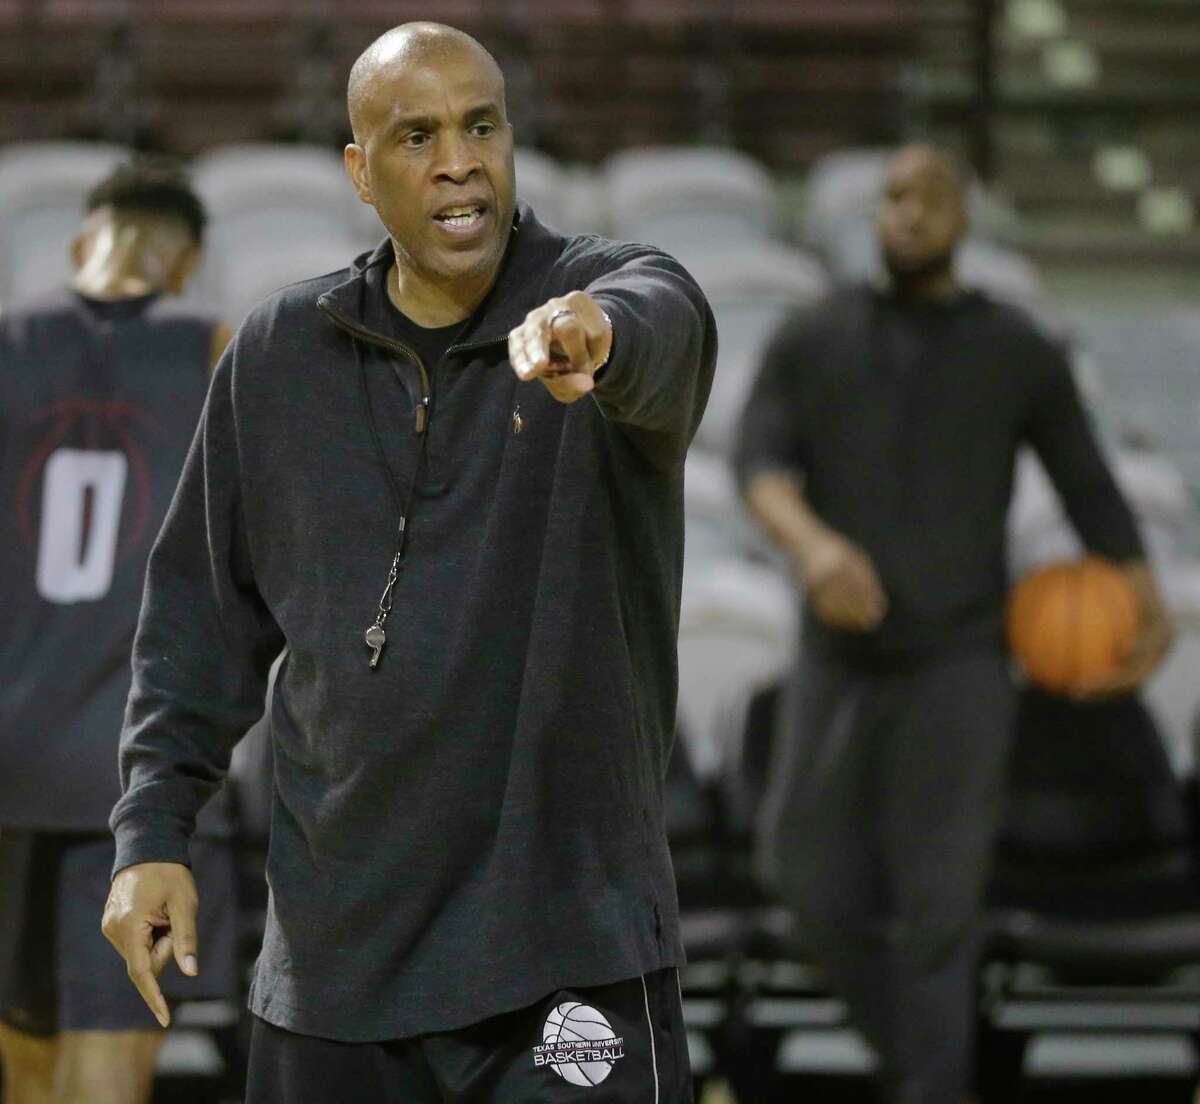 Mike Davis, Texas Southern University basketball head coach, is shown during practice at TSU Wednesday, Nov. 8, 2017, in Houston. ( Melissa Phillip / Houston Chronicle )